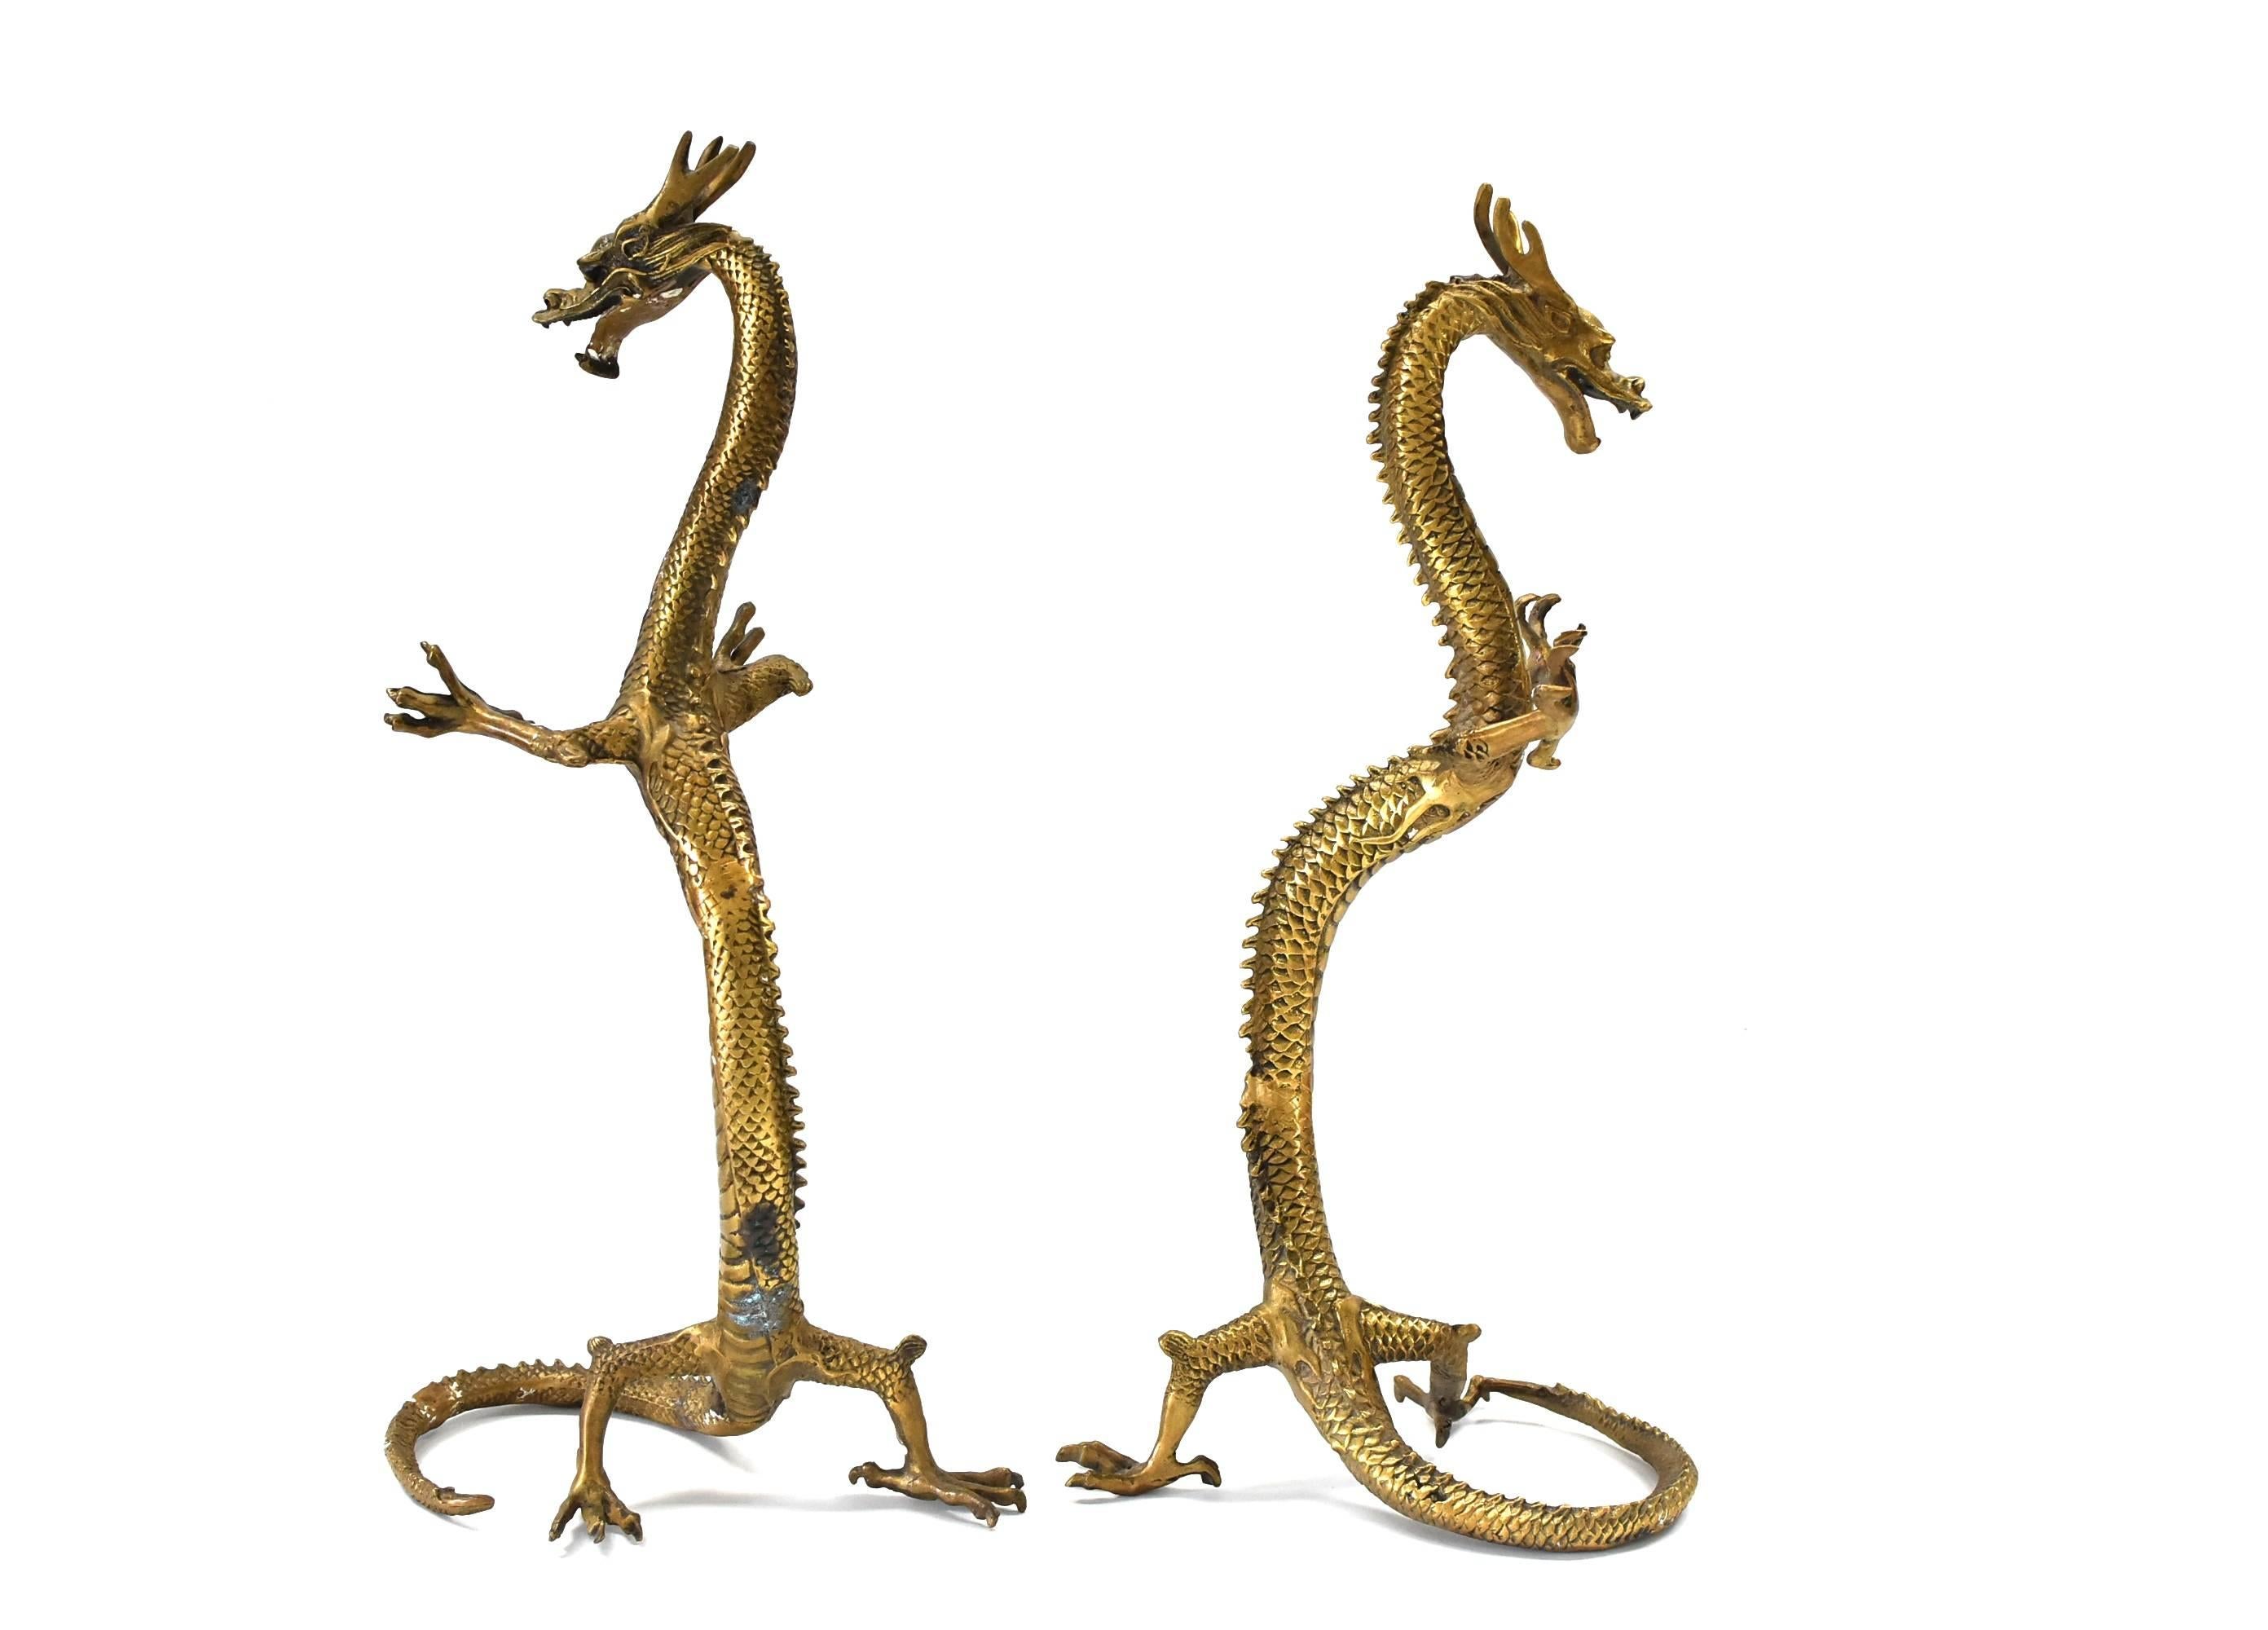 The sign of Emperor, Dragon is the most important symbol of power, leadership and prosperity in the Chinese culture. These pieces are highly unique with the dragons in a standing position. They are playful and whimsical, unlike the traditional stern